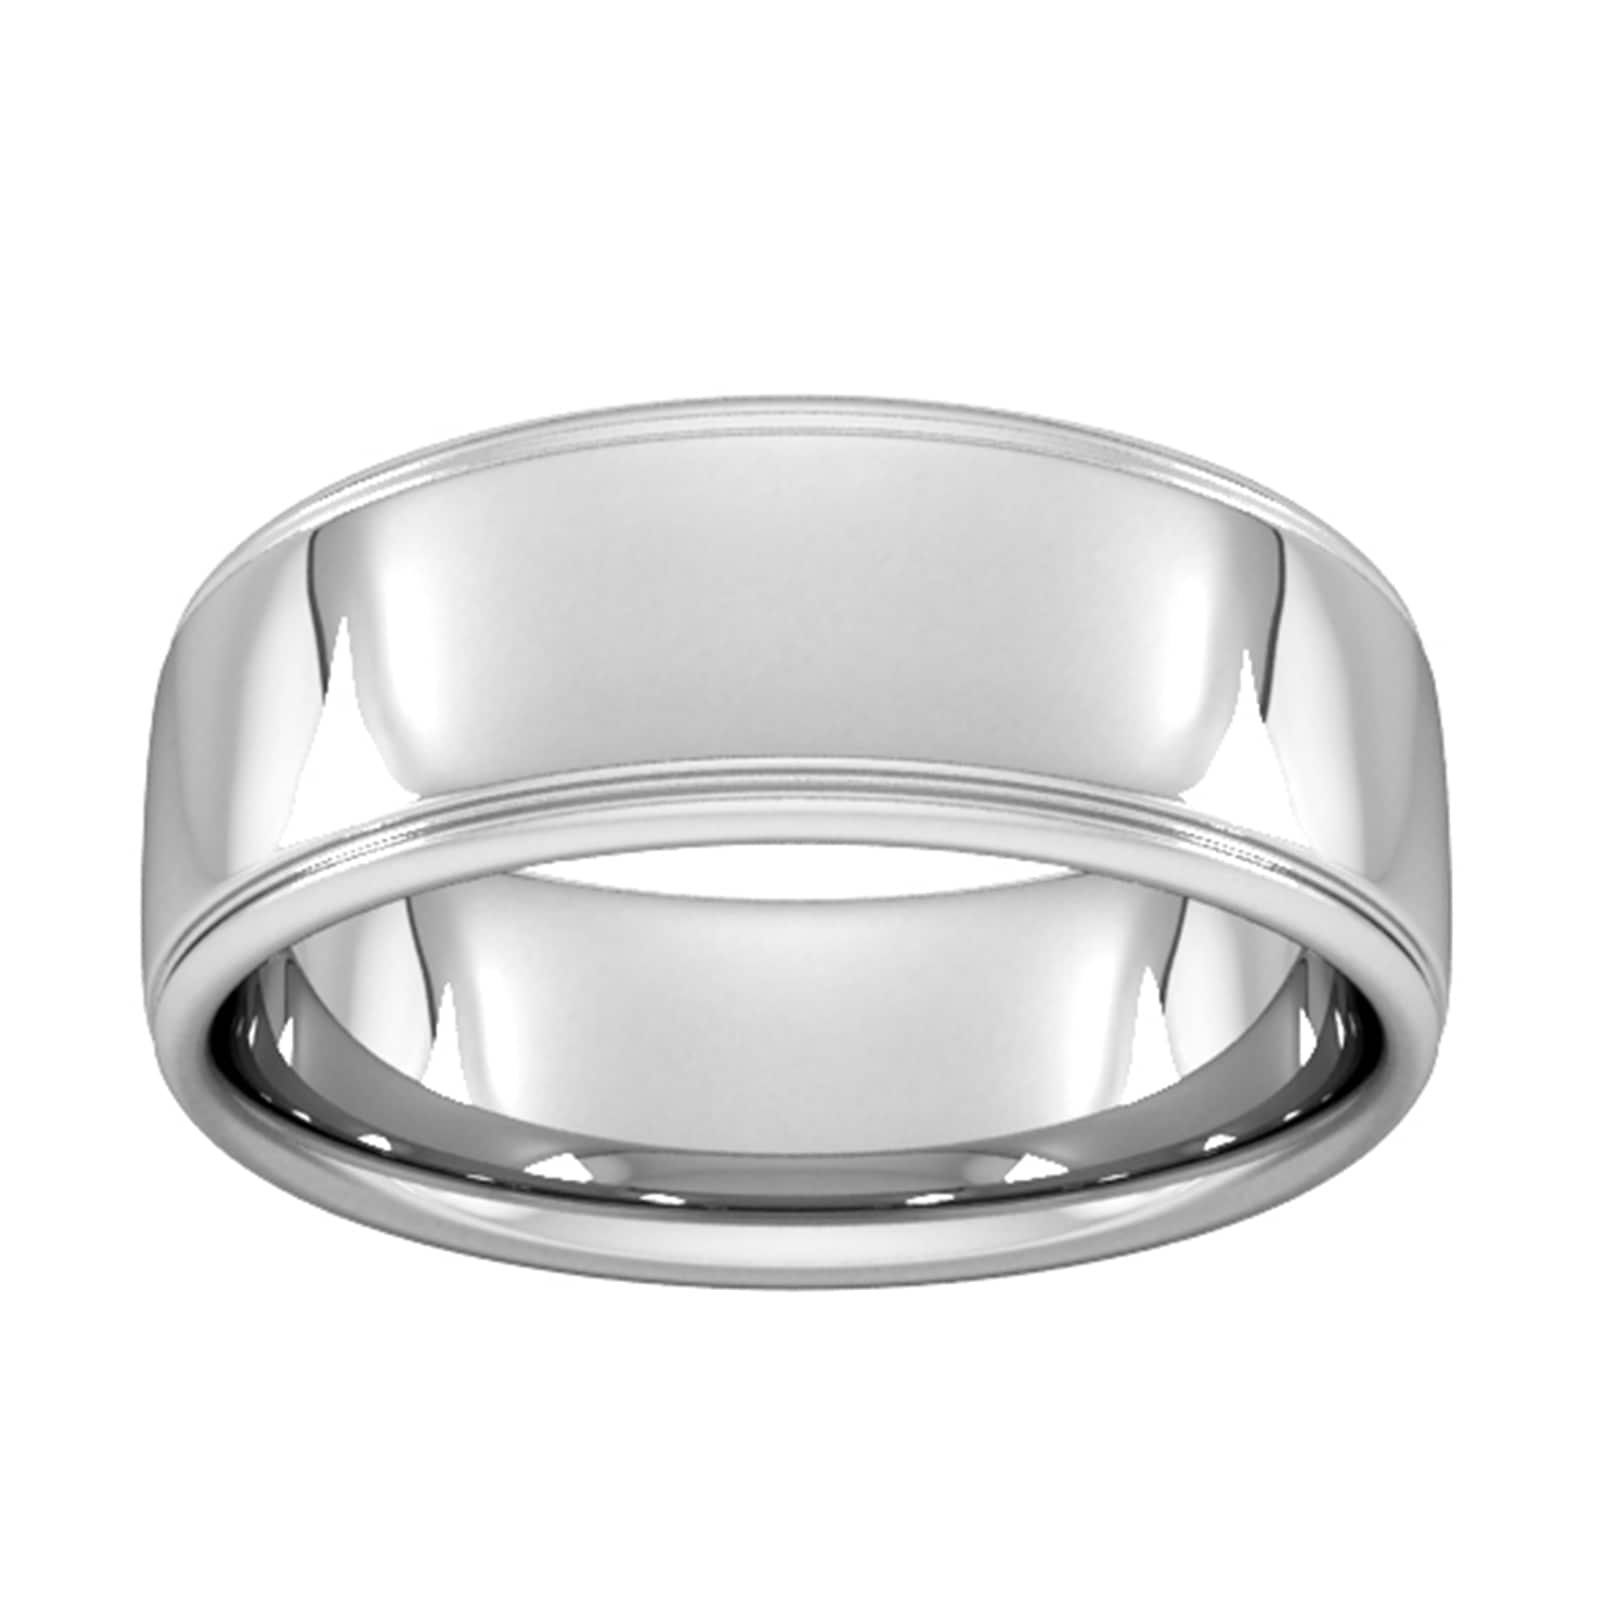 8mm Slight Court Heavy Polished Finish With Grooves Wedding Ring In 9 Carat White Gold - Ring Size R